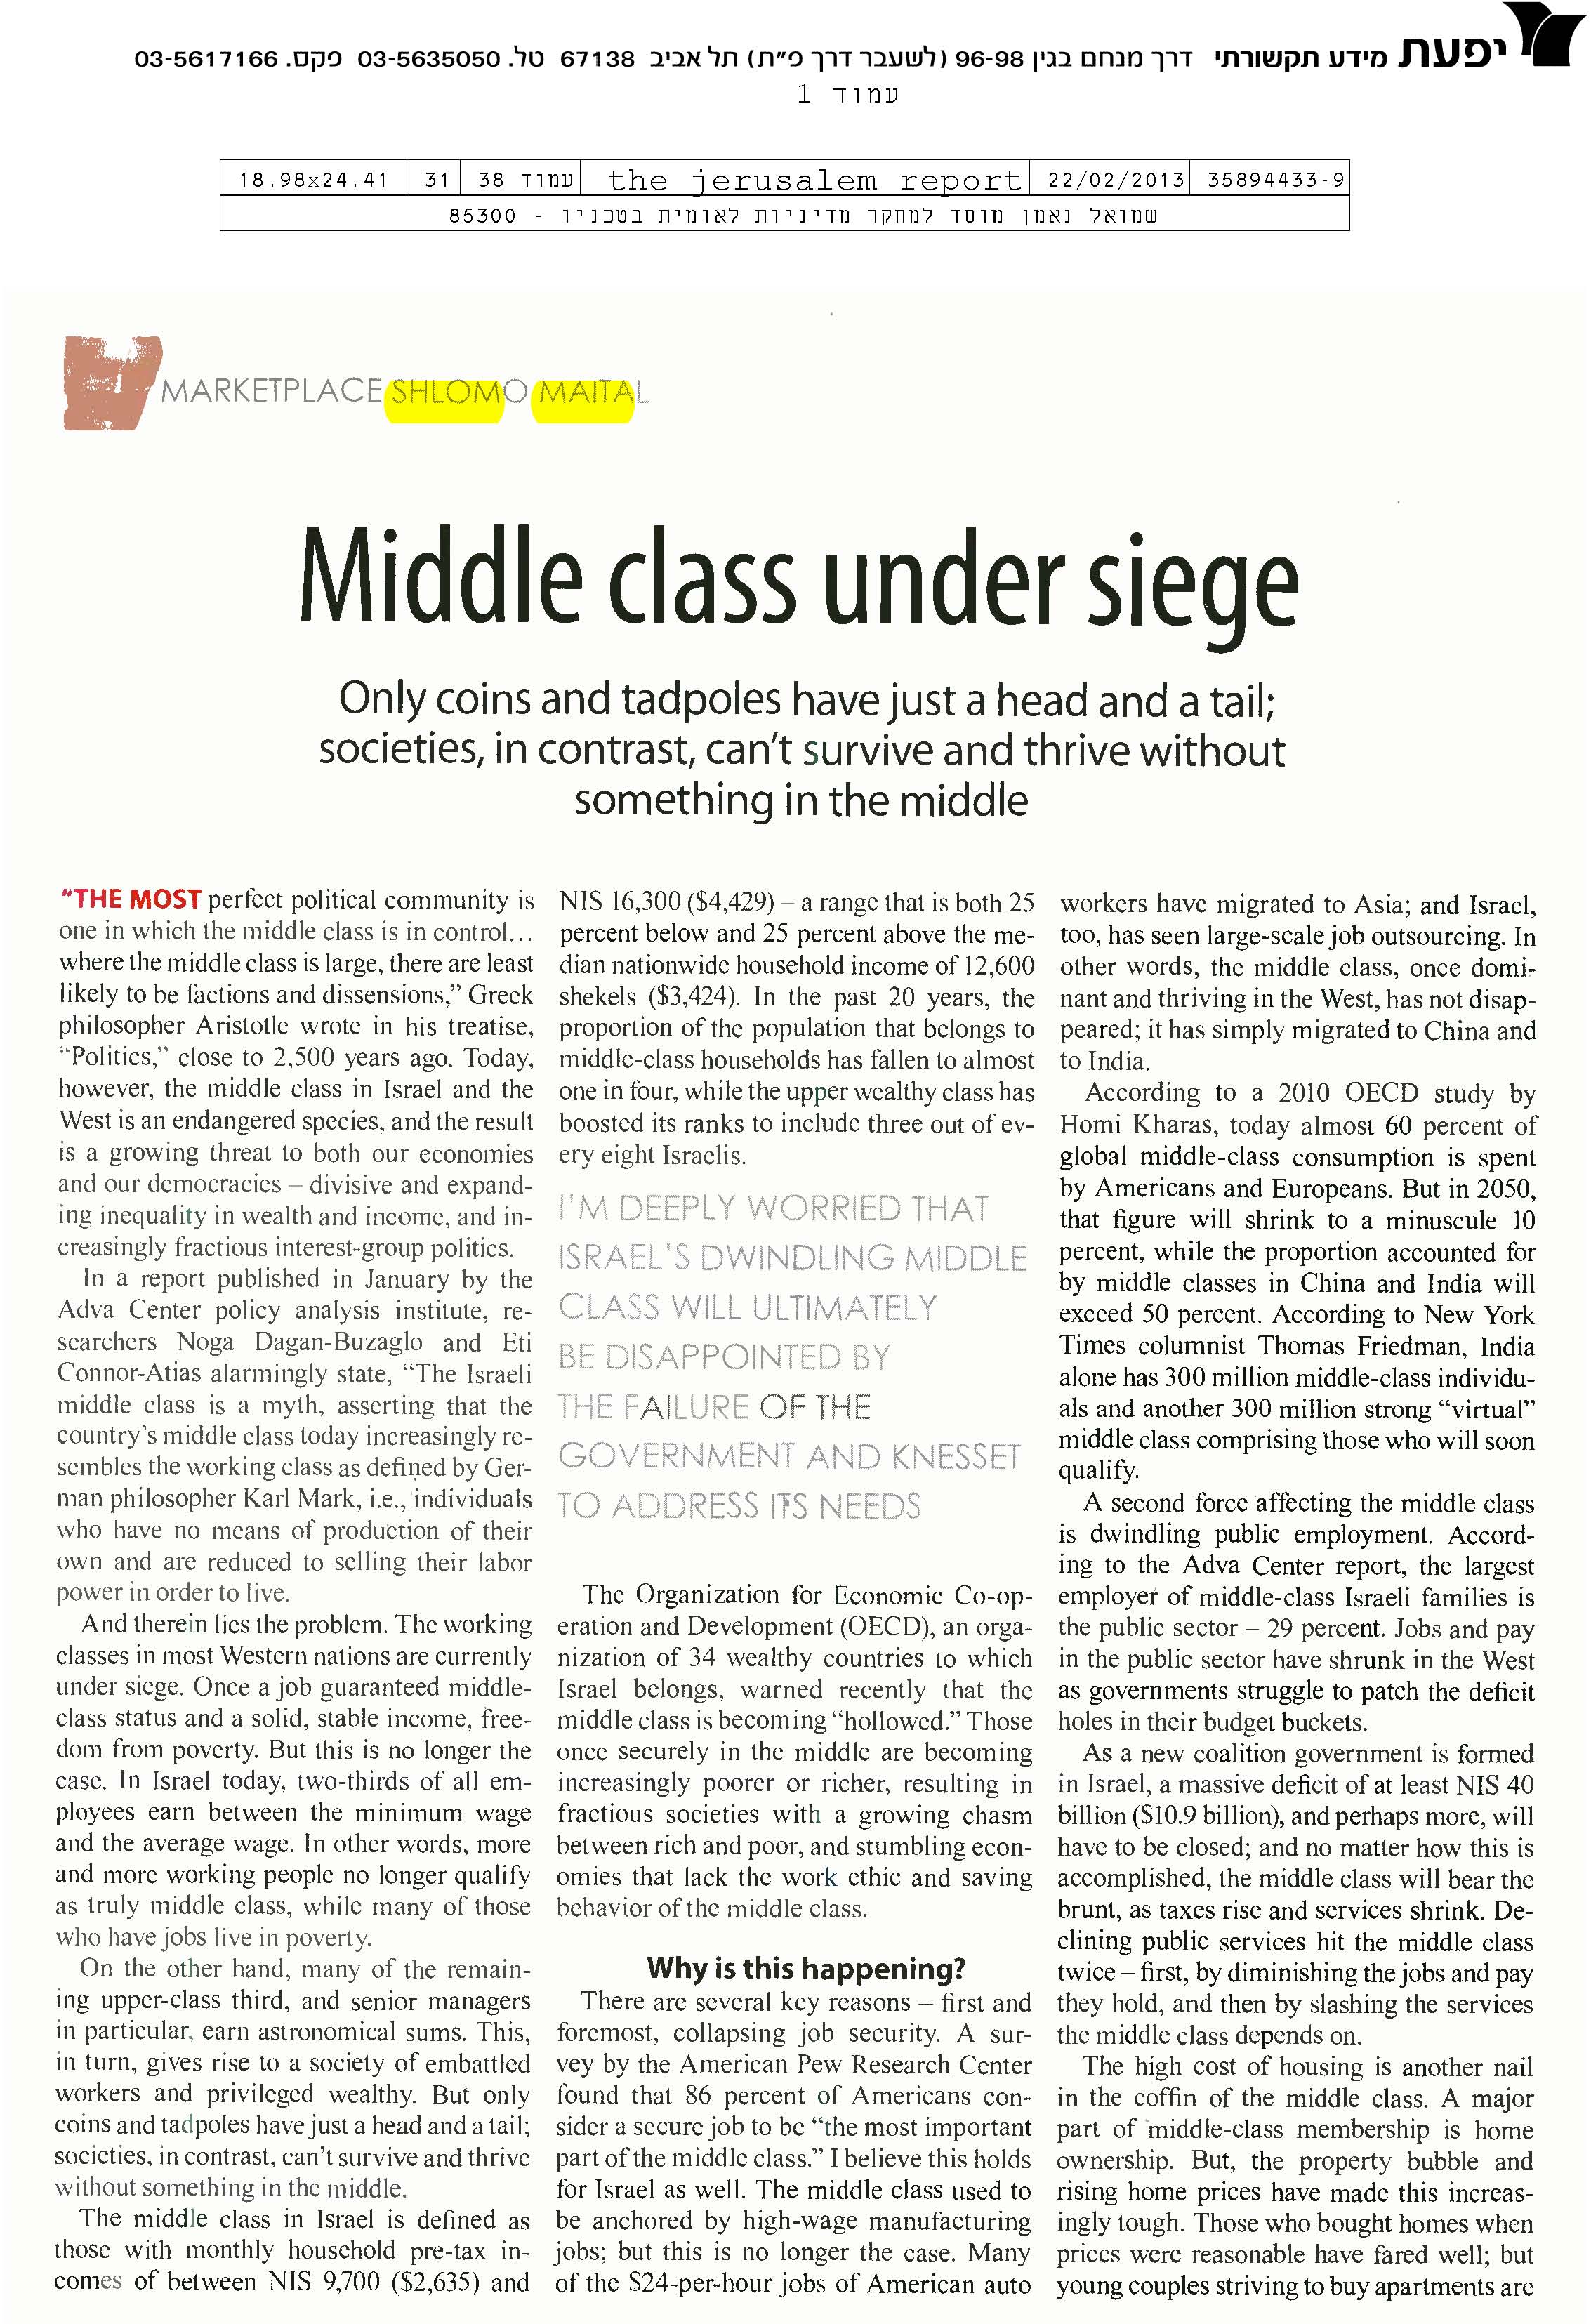 Middle class under siege